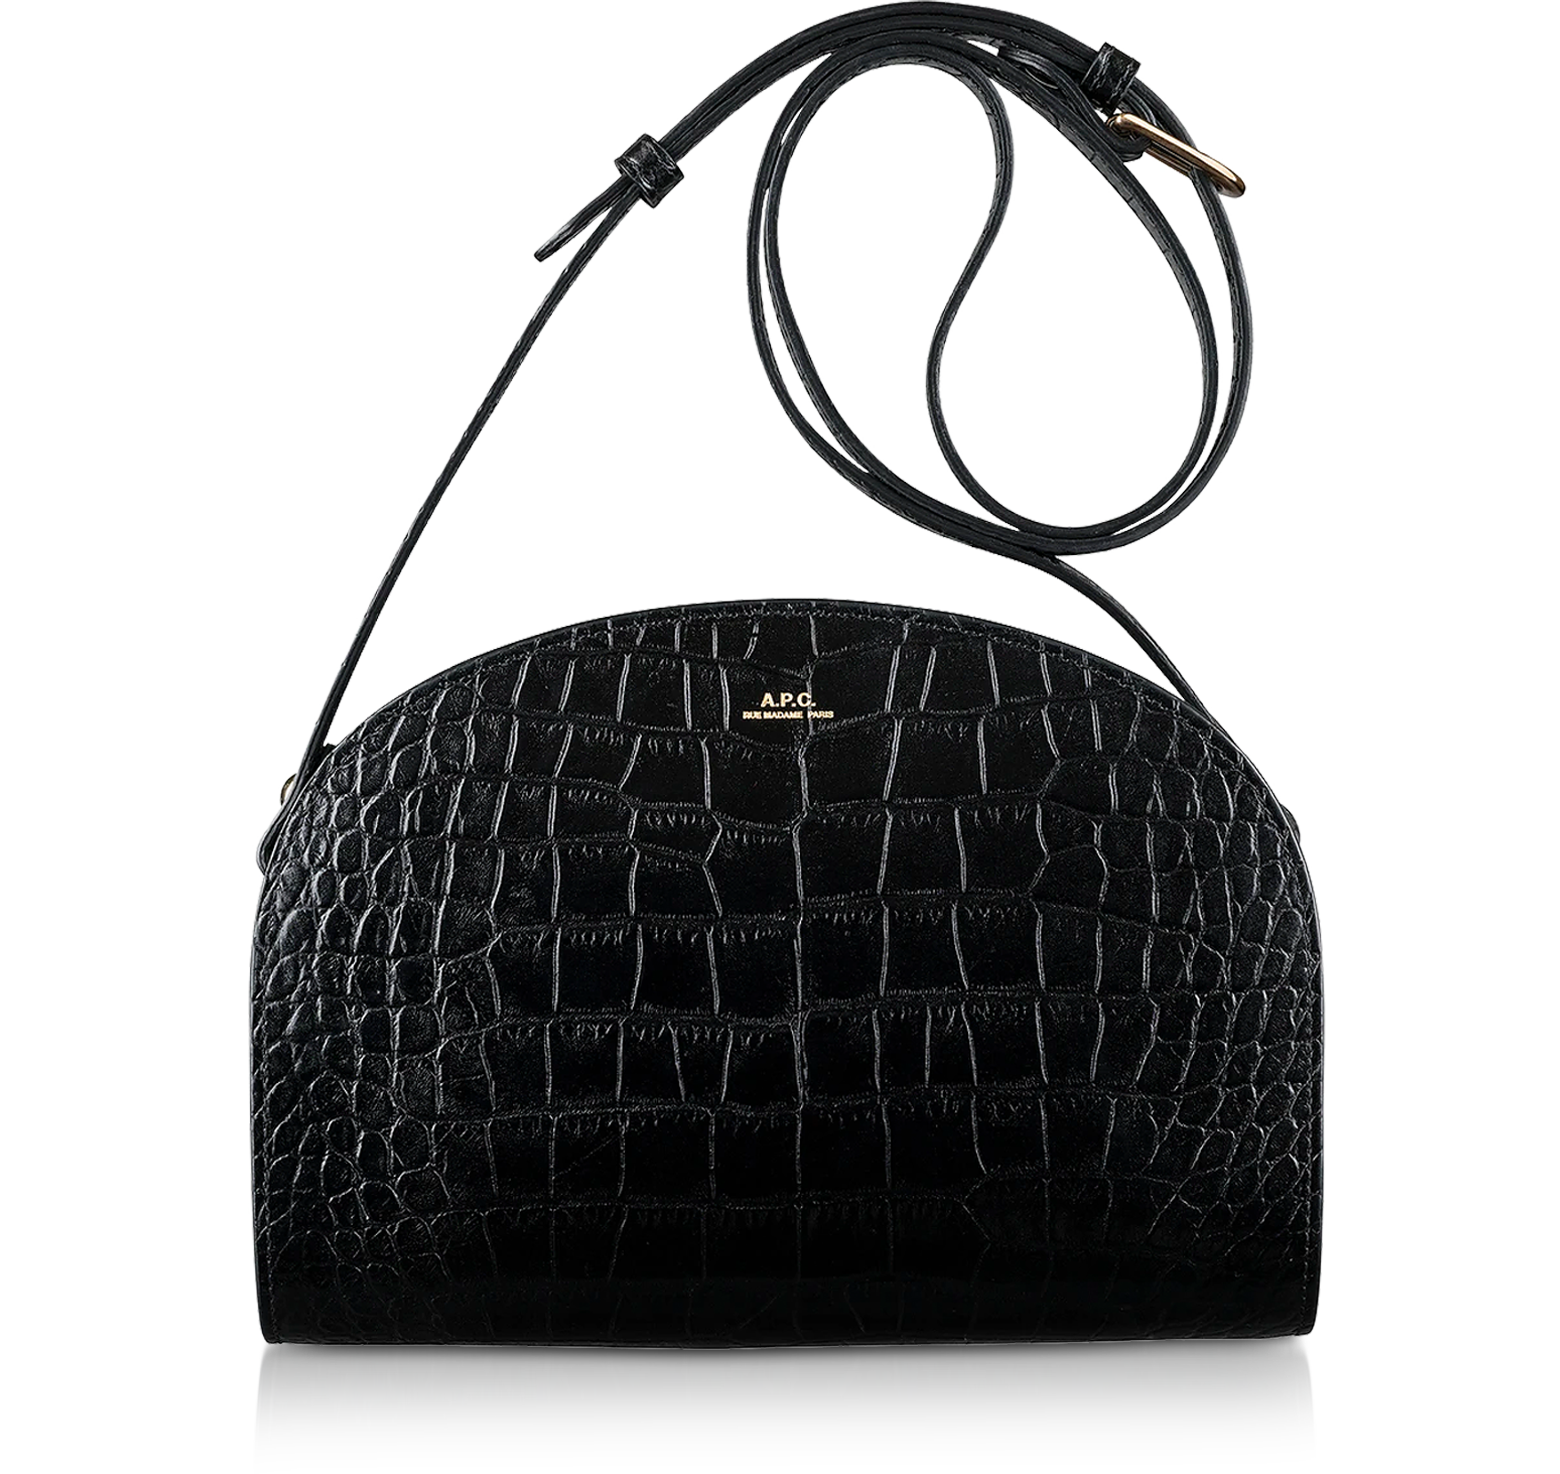 A.P.C. Black Croco Embossed Leather Demi-Lune Shoulder Bag at FORZIERI